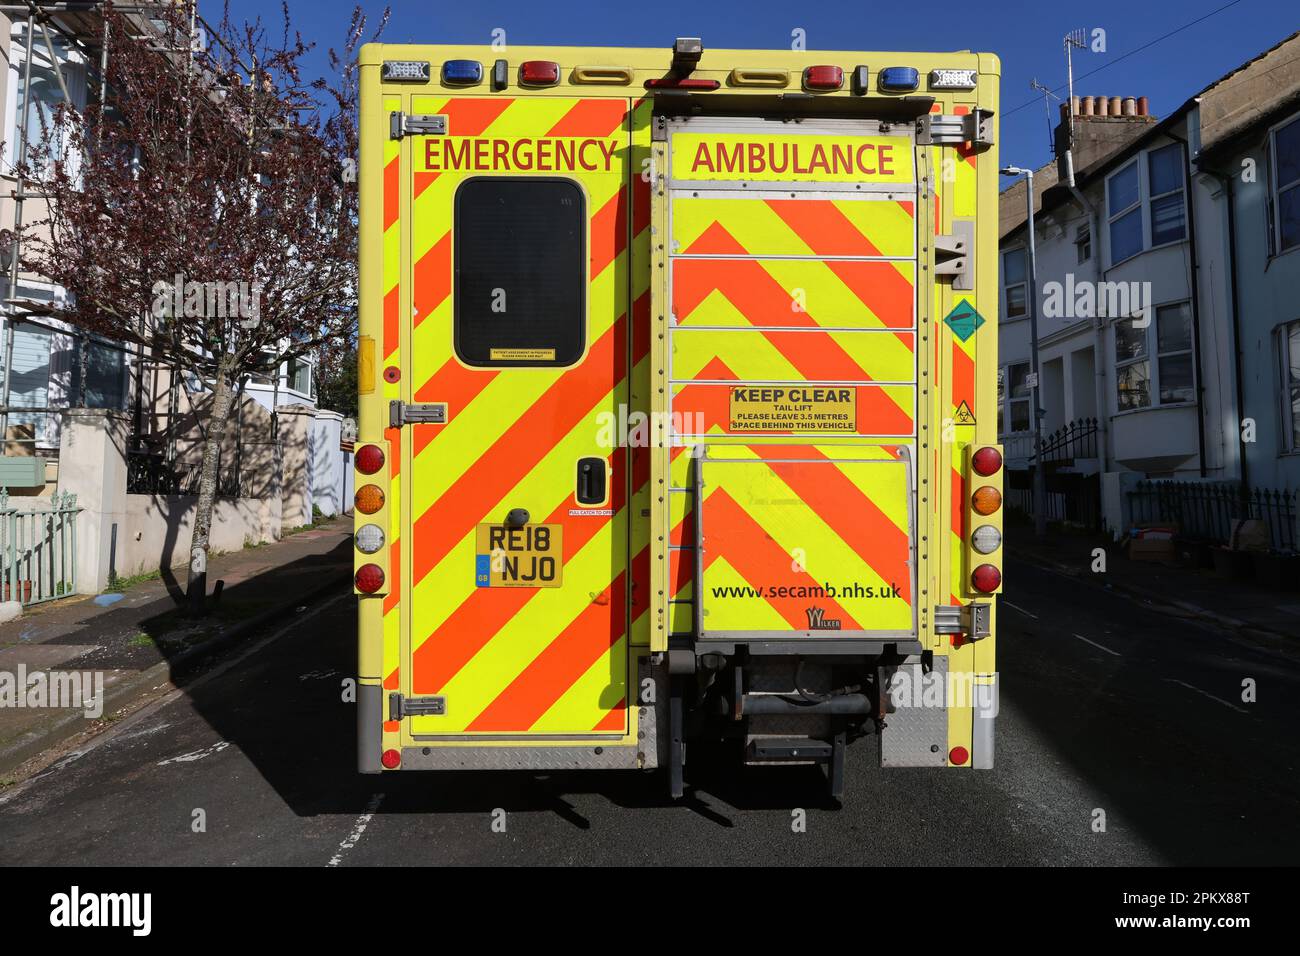 An ambulance responds to an emergency in a street in Brighton Stock Photo